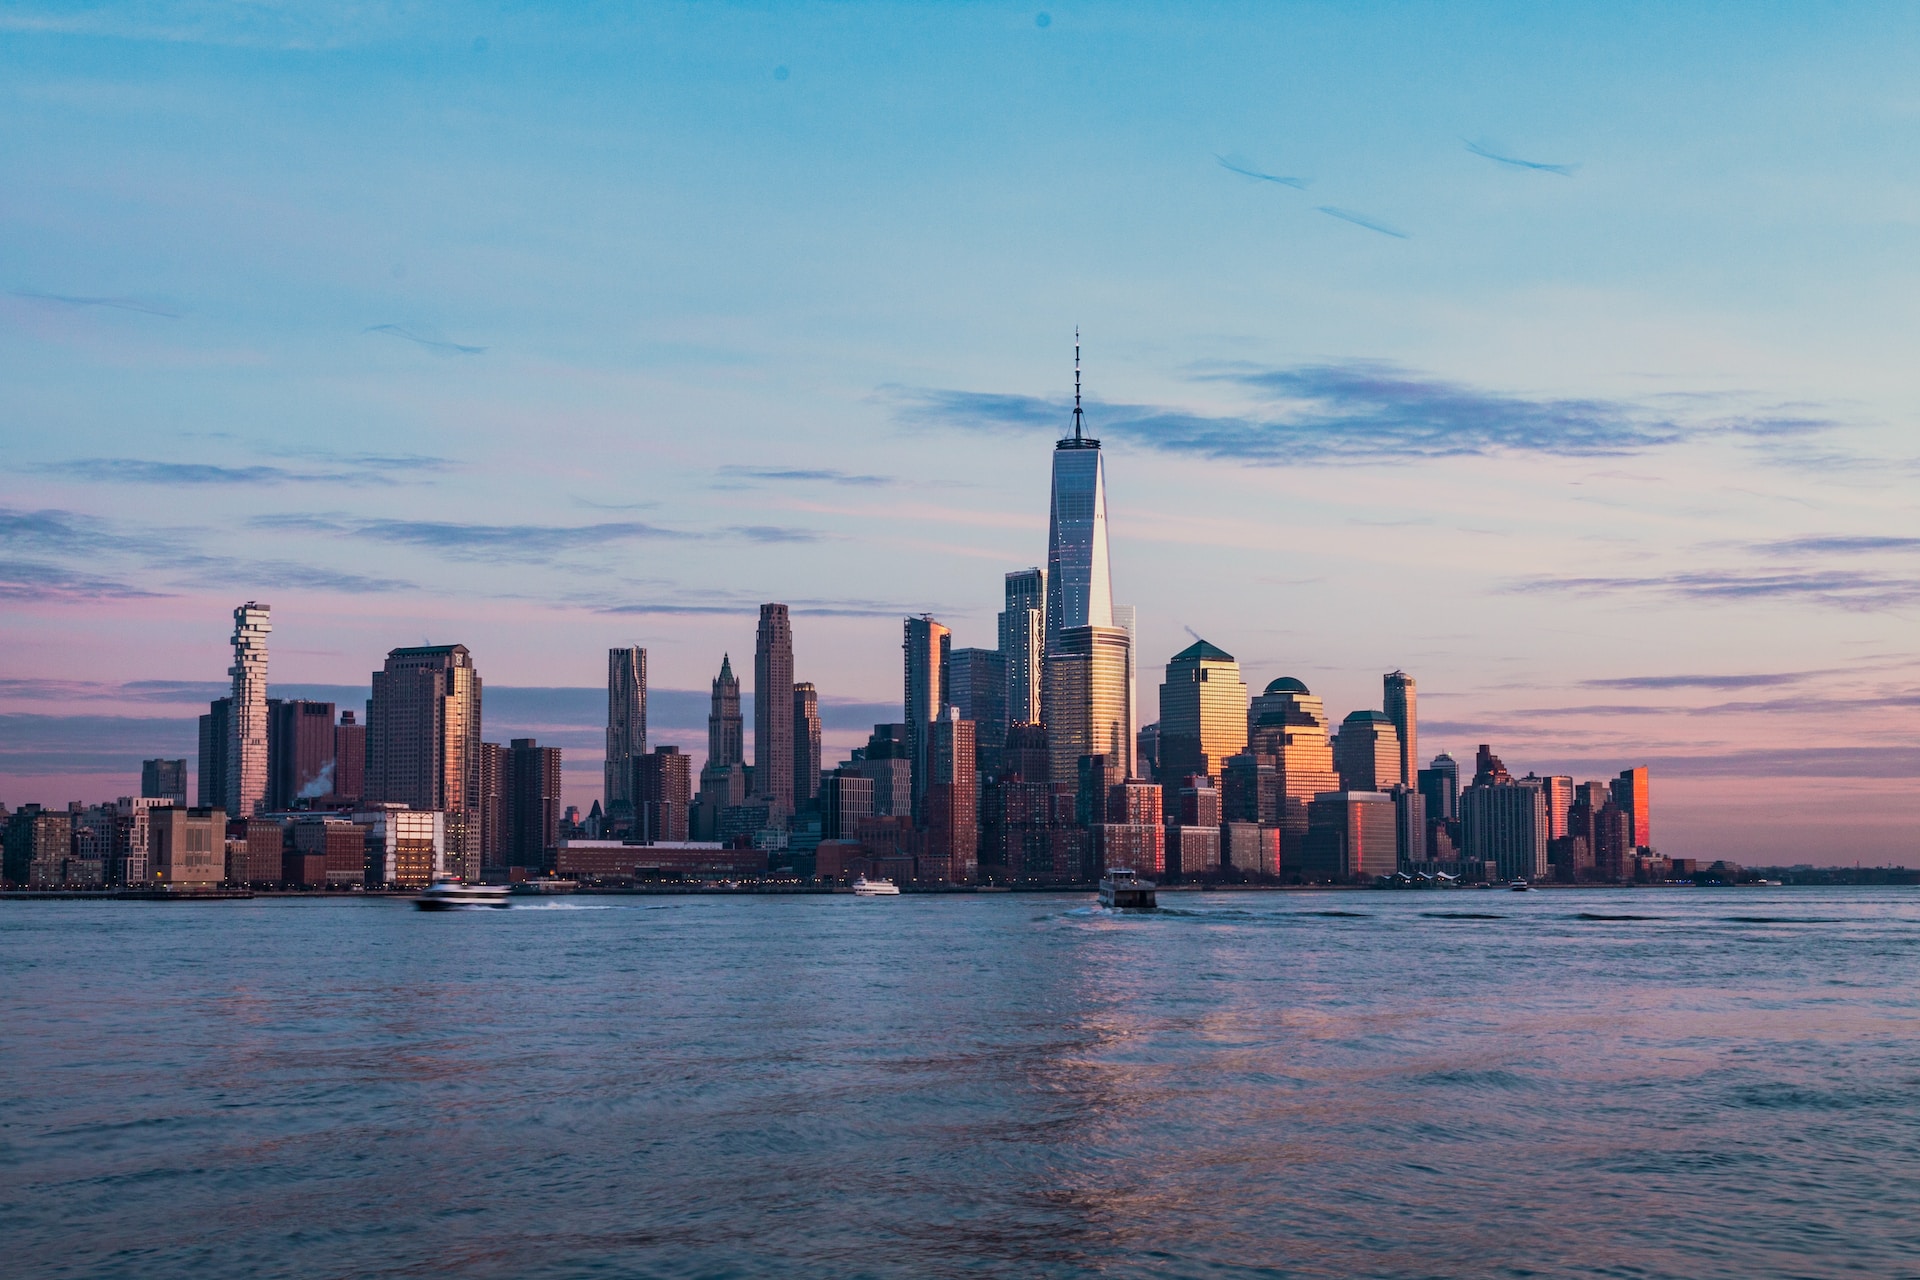 Basic Steps and considerations for planning a mission trip to NYC